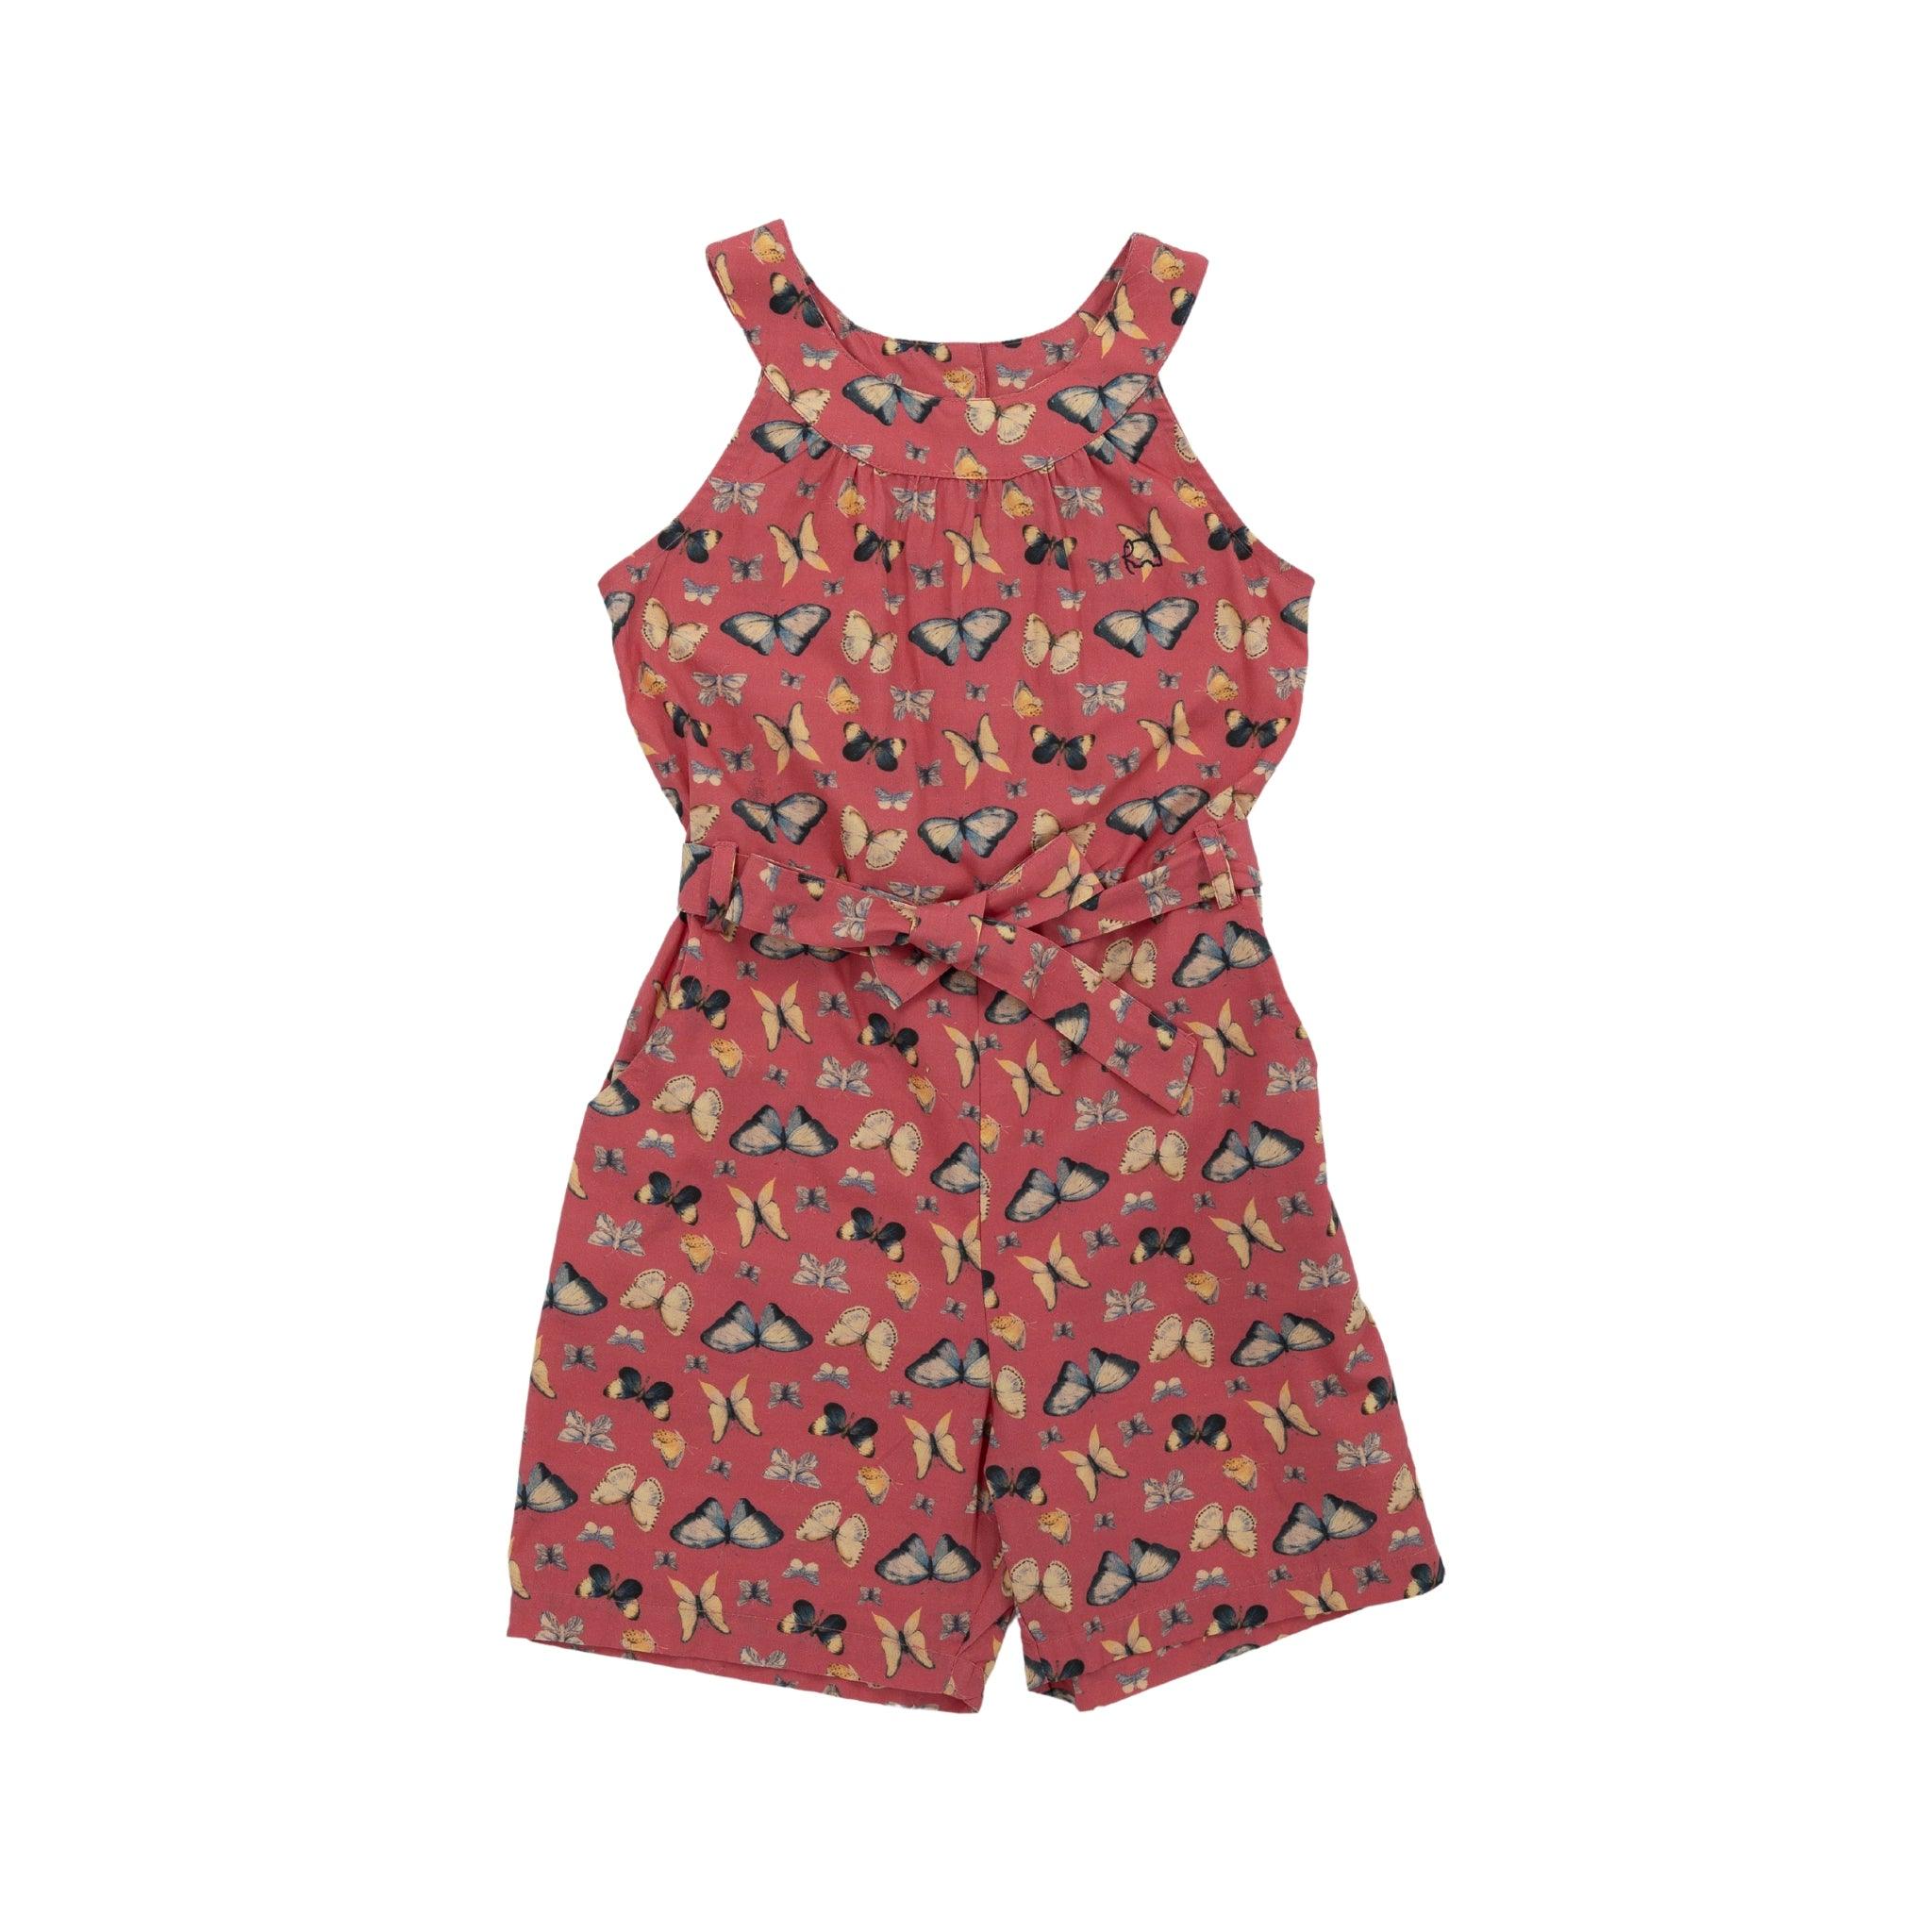 Karee's Ruby Trek Cotton Romper features a floral and butterfly print with a tie waist, sleeveless design, isolated on a white background.